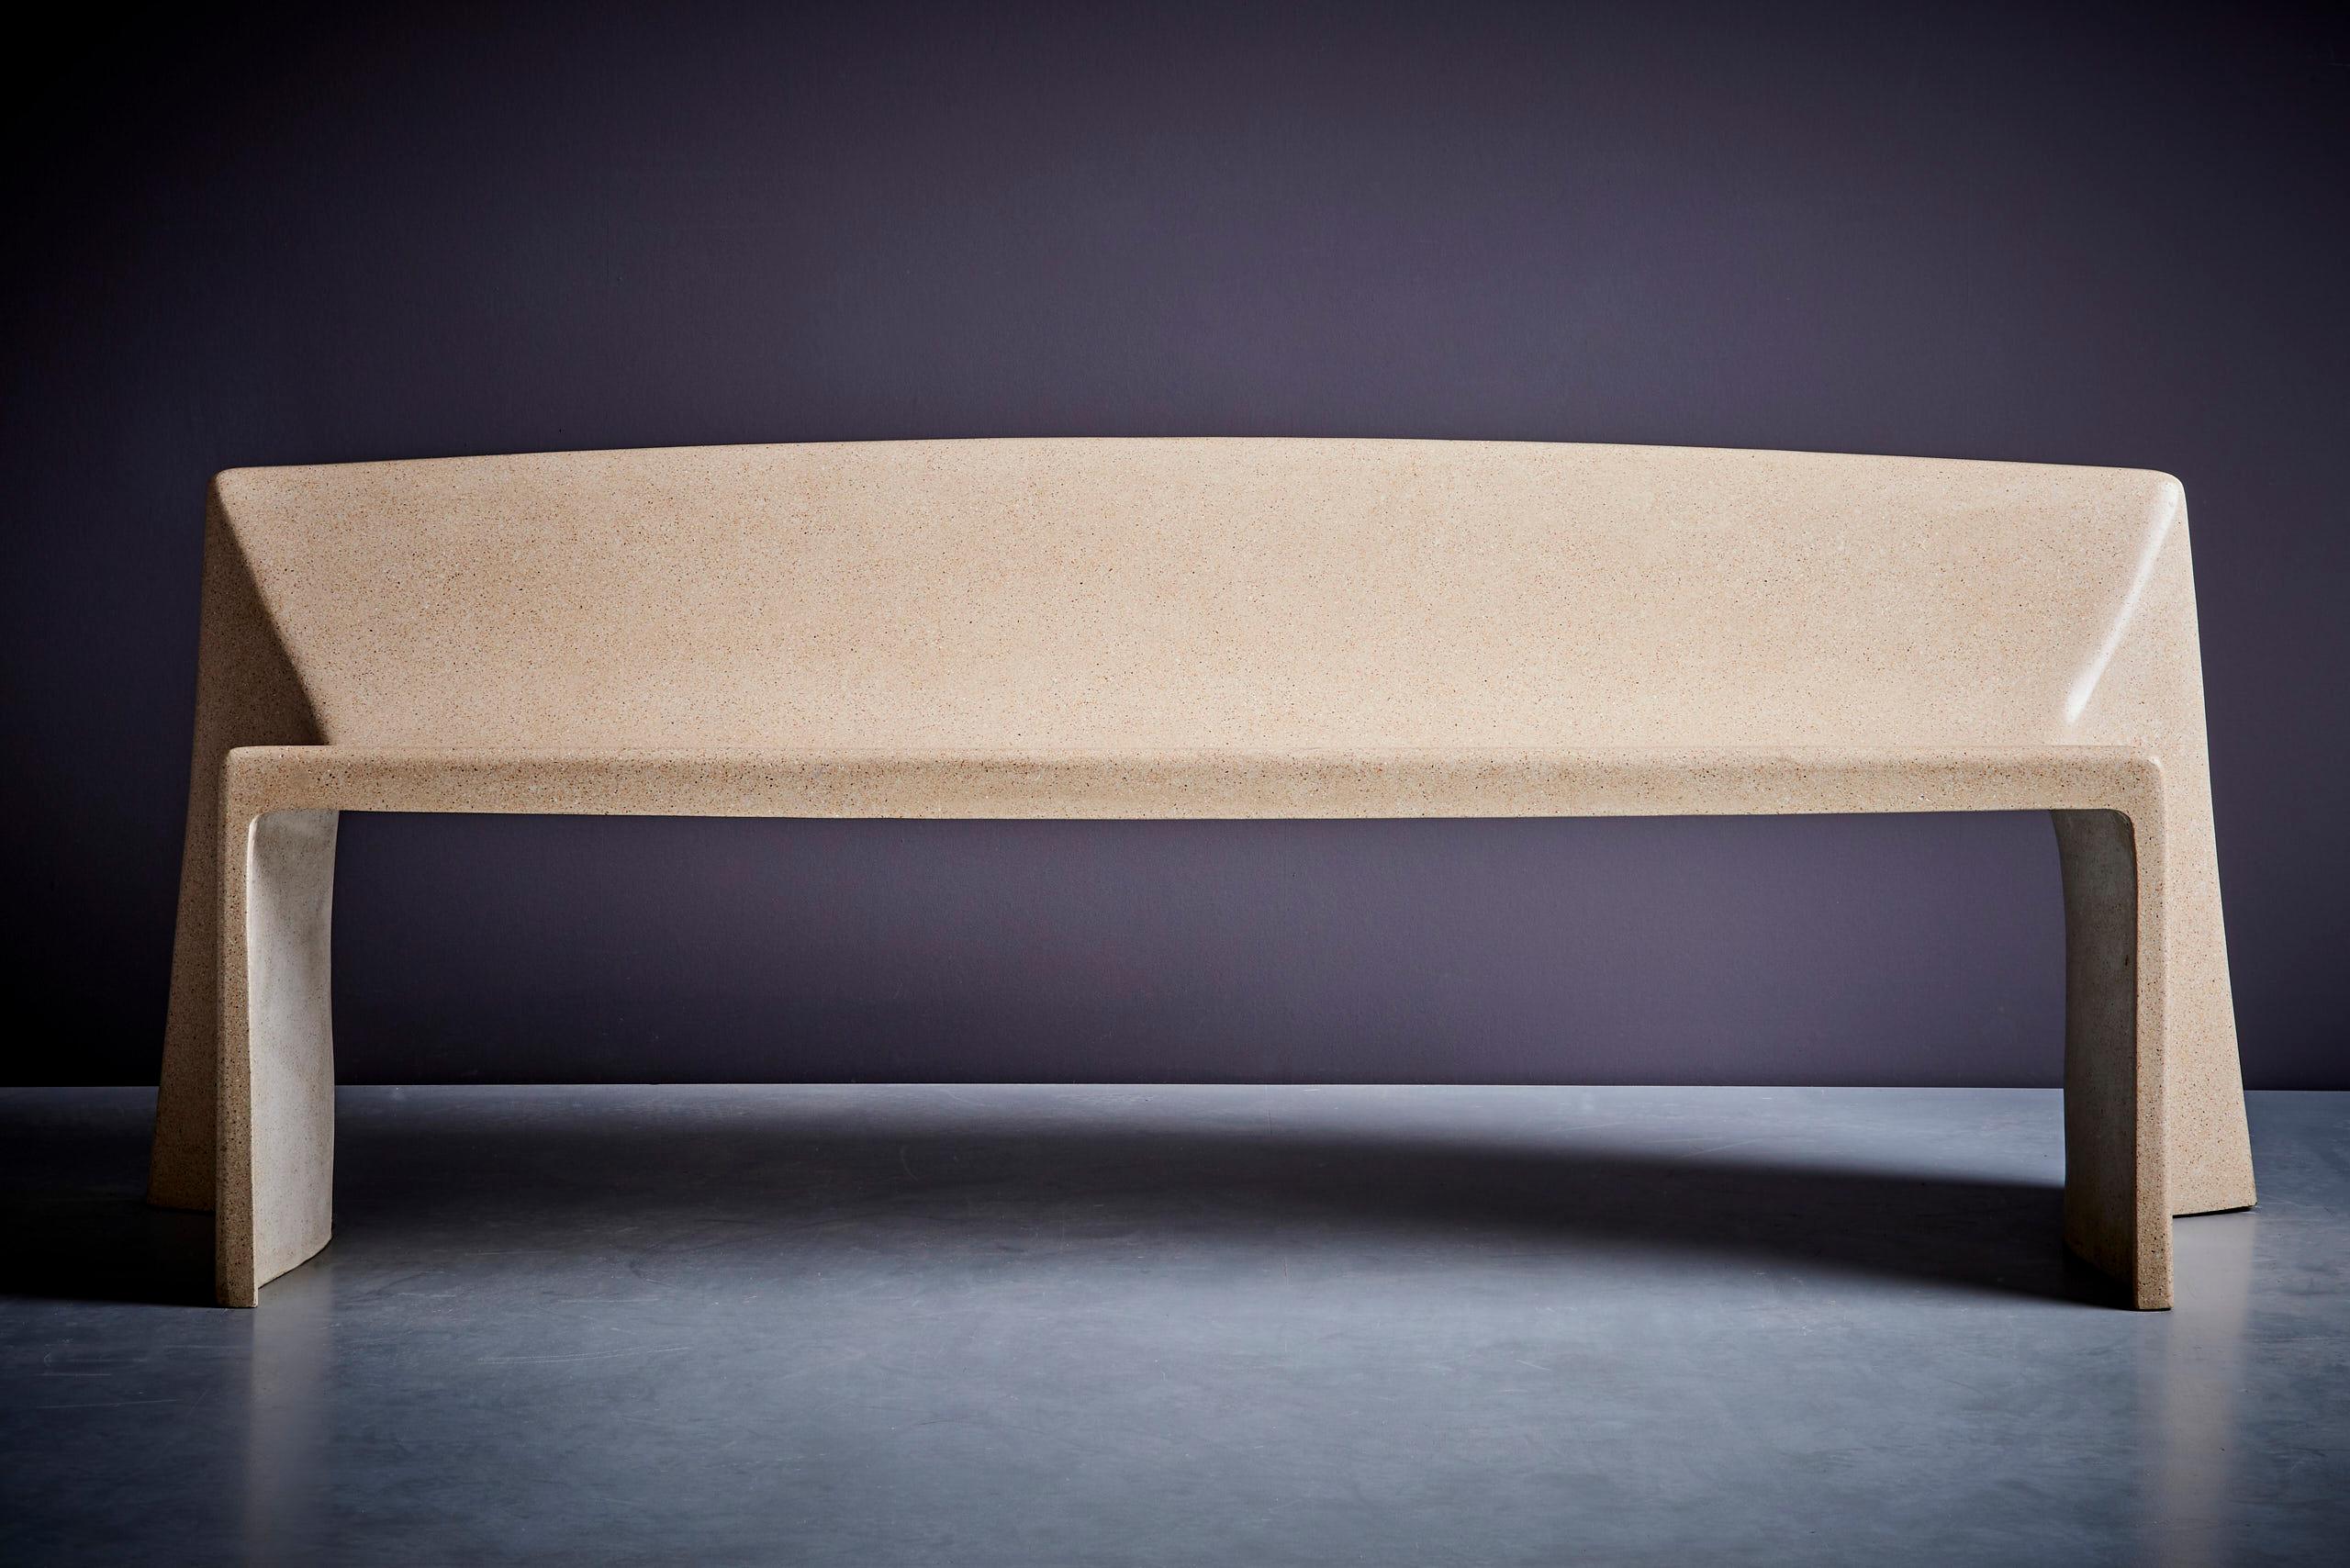 Architectural Concrete Bench by Martin Kleppe, Germany, circa 2011 For Sale 5